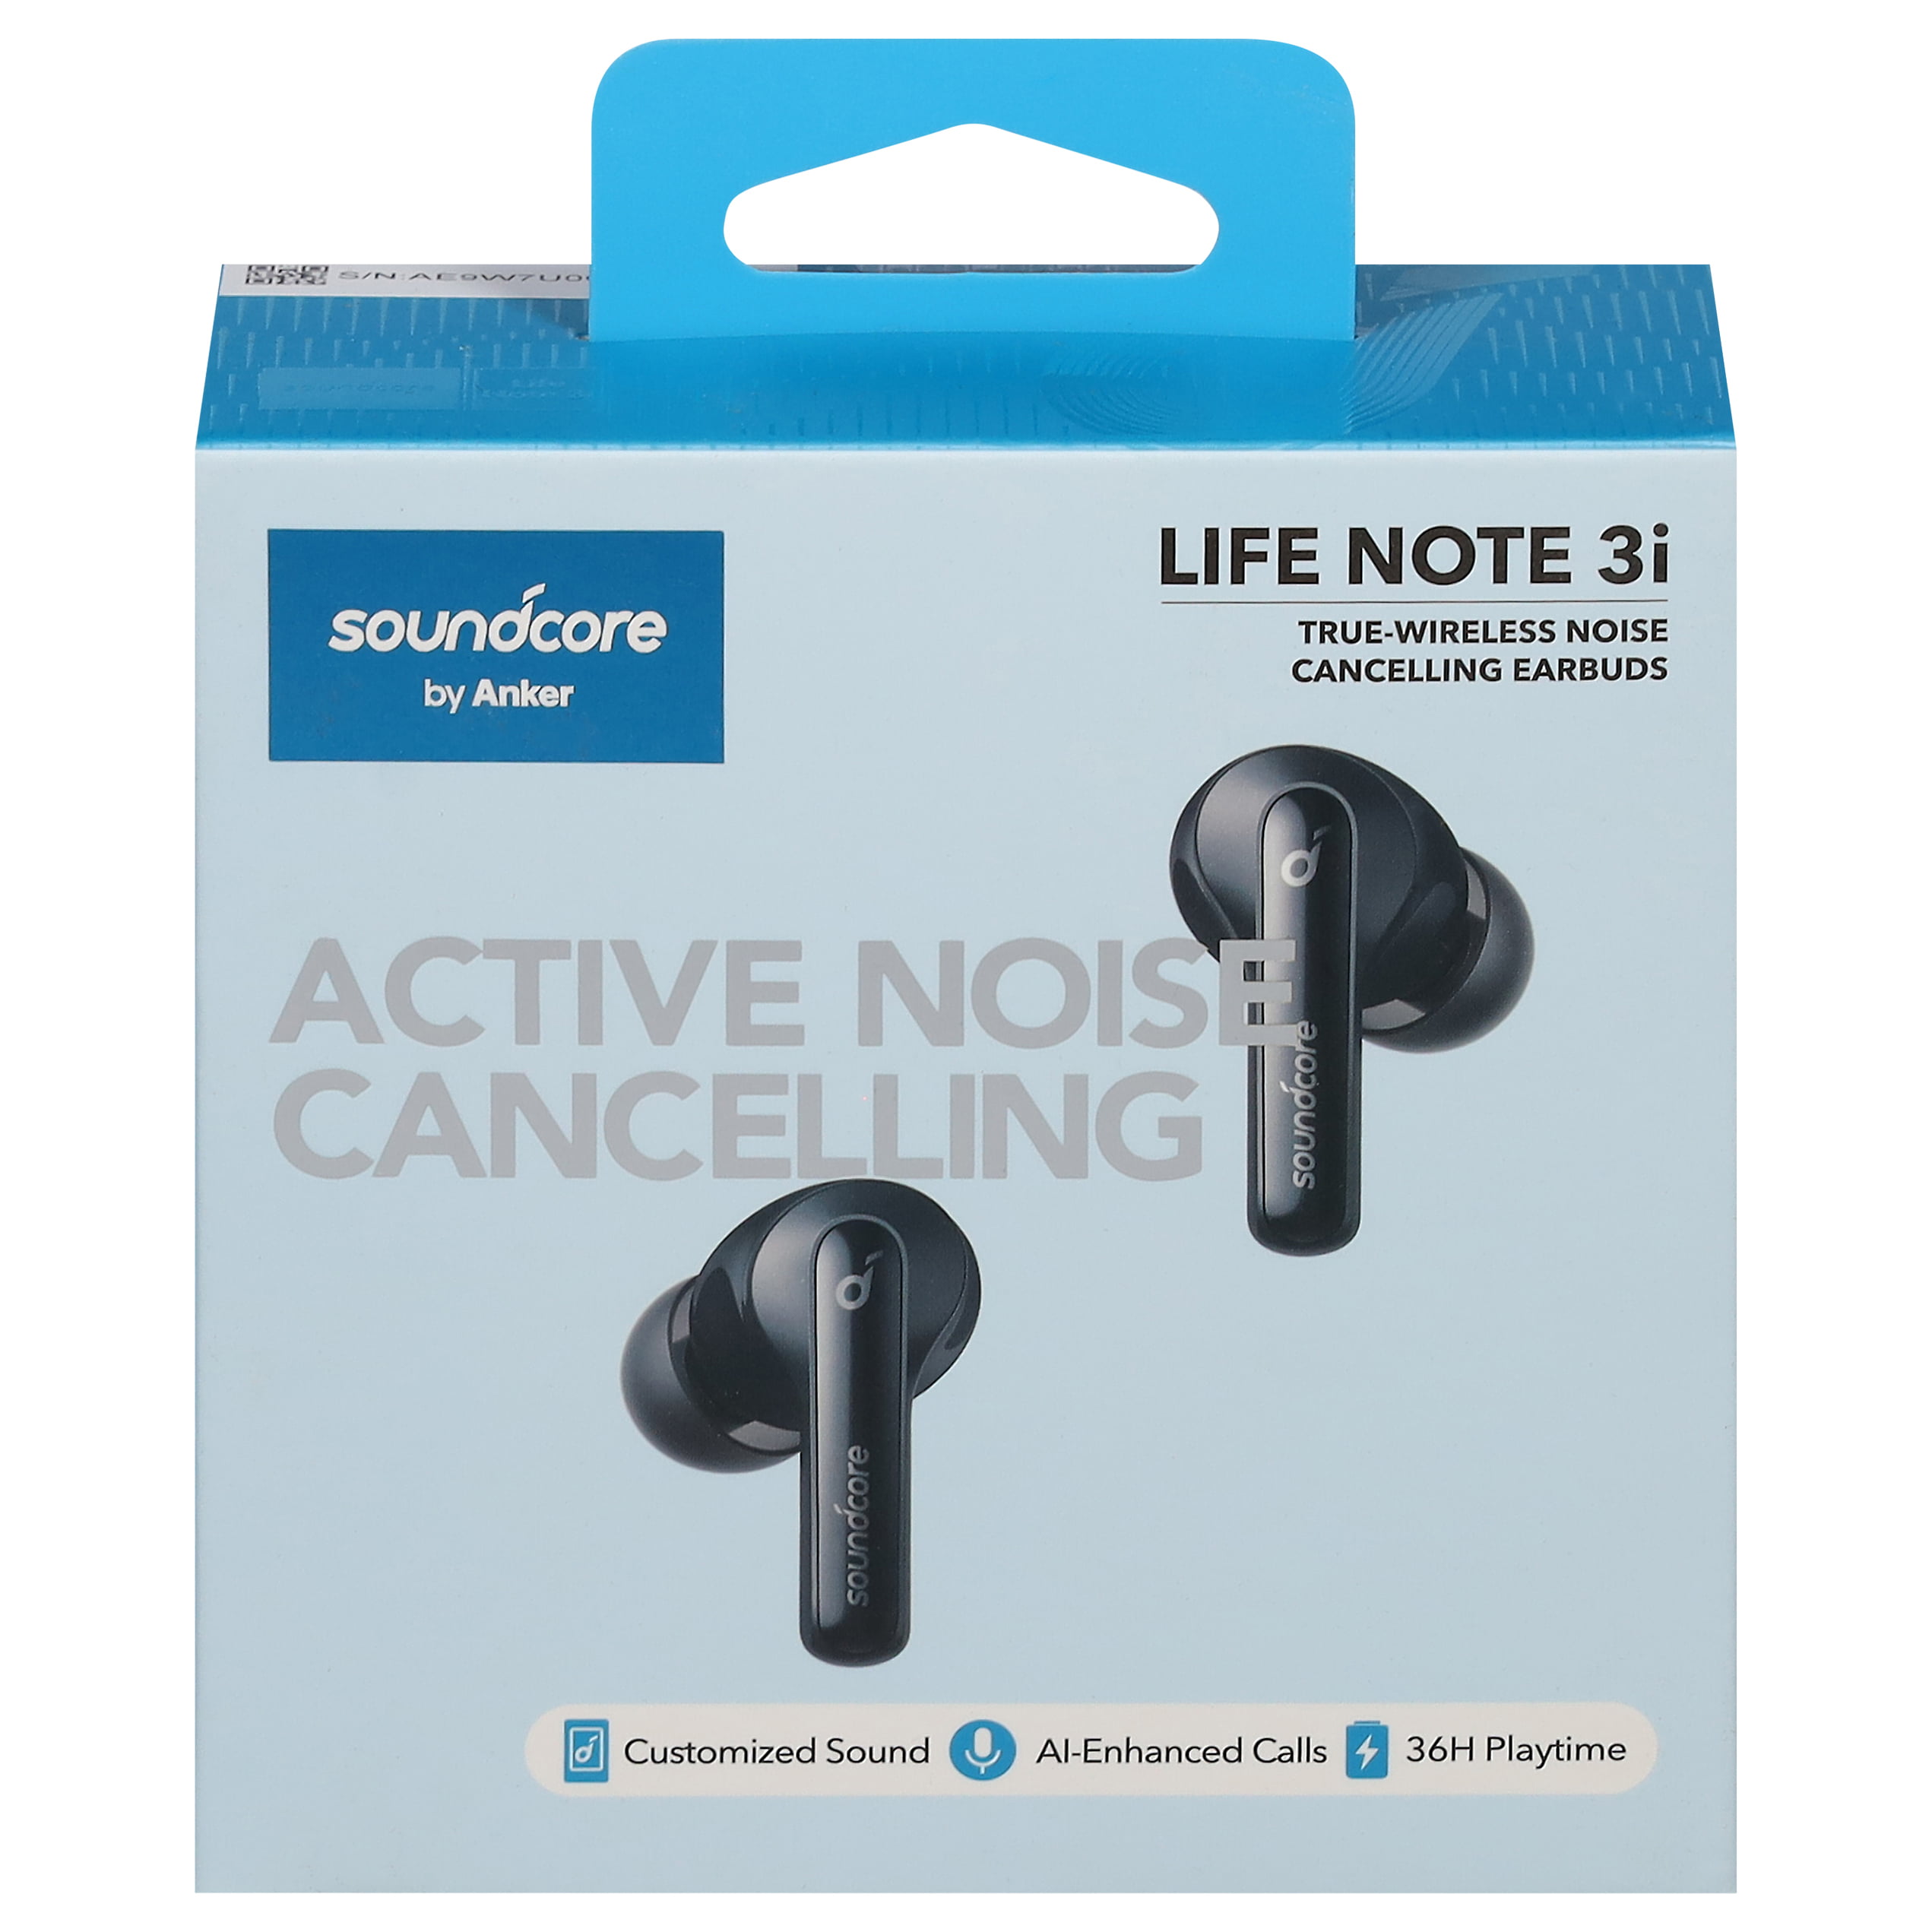 Soundcore Anker A3983Z11 Soundcore Life Note 3i Wrls Tws Earbuds W/ Mic + Noise  Cancel